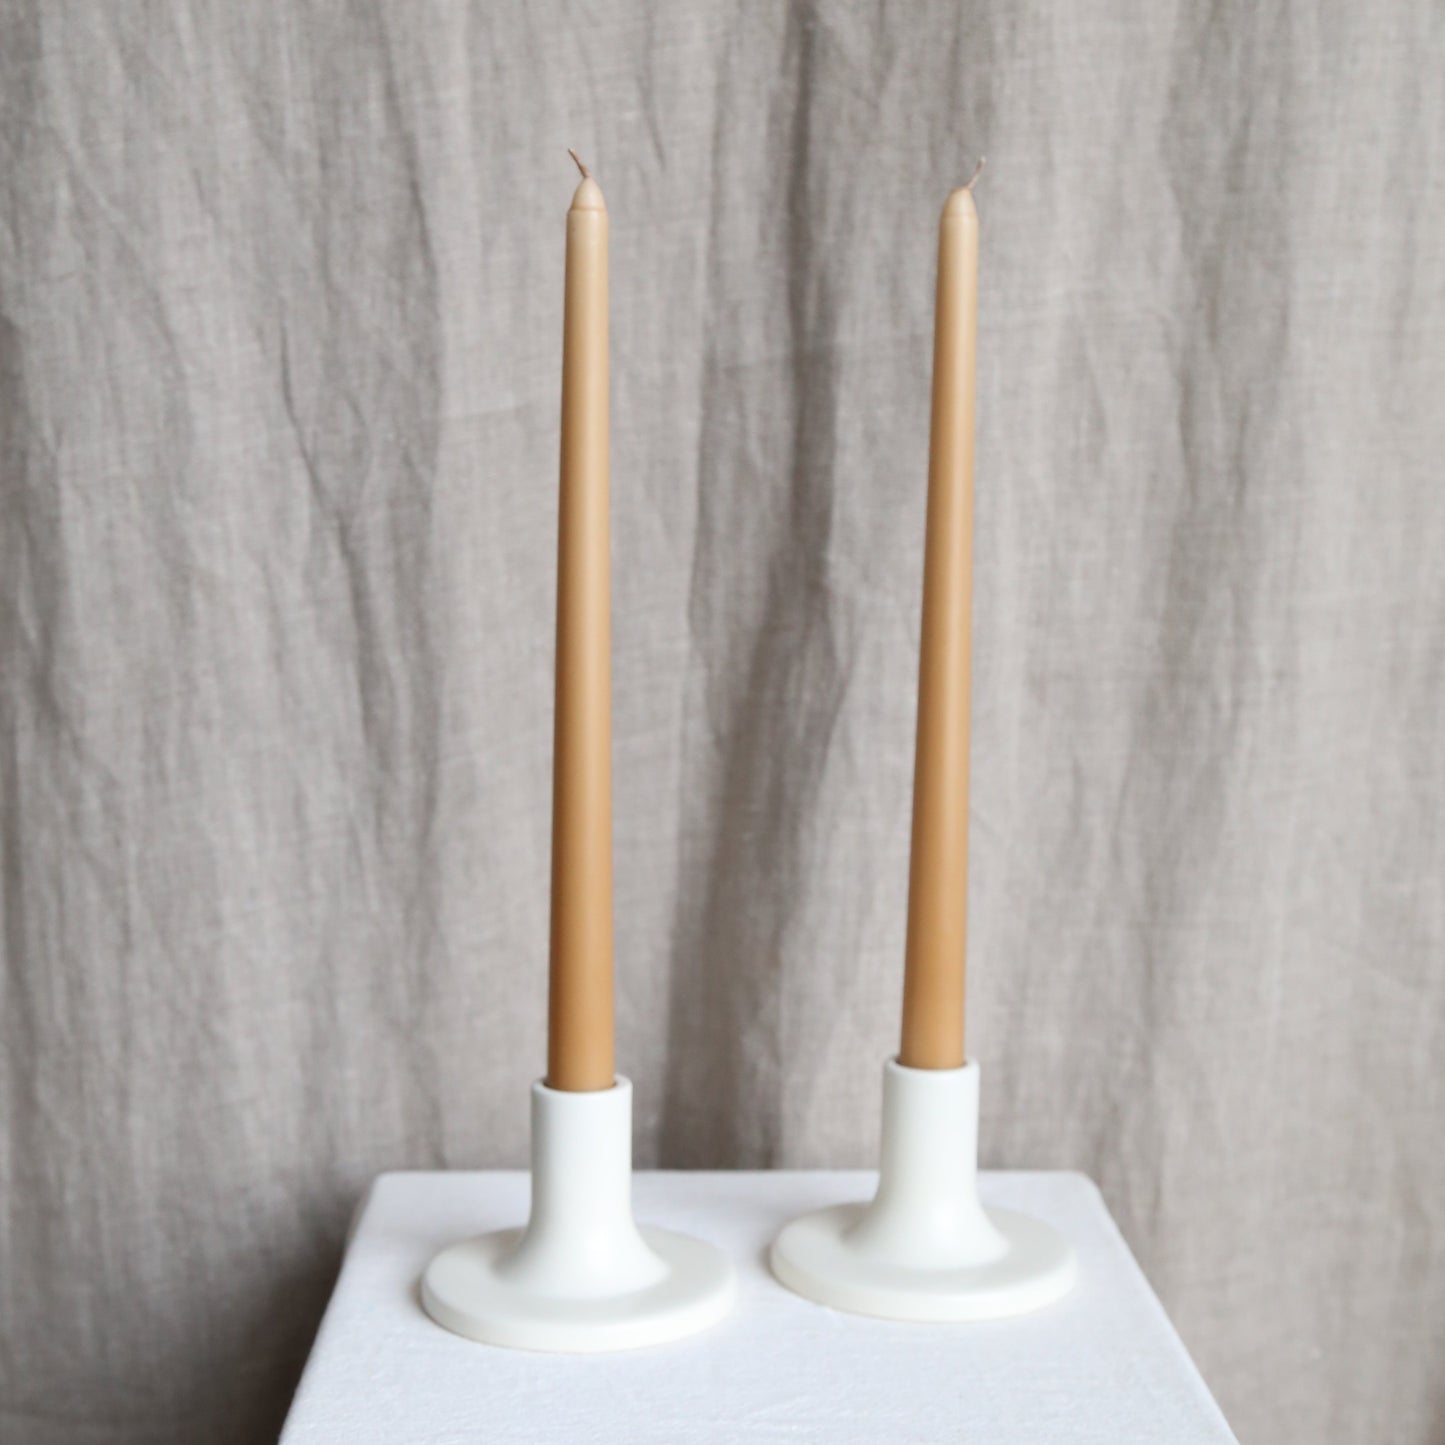 Pair of caramel taper candles in white holders available at Rook & Rose.